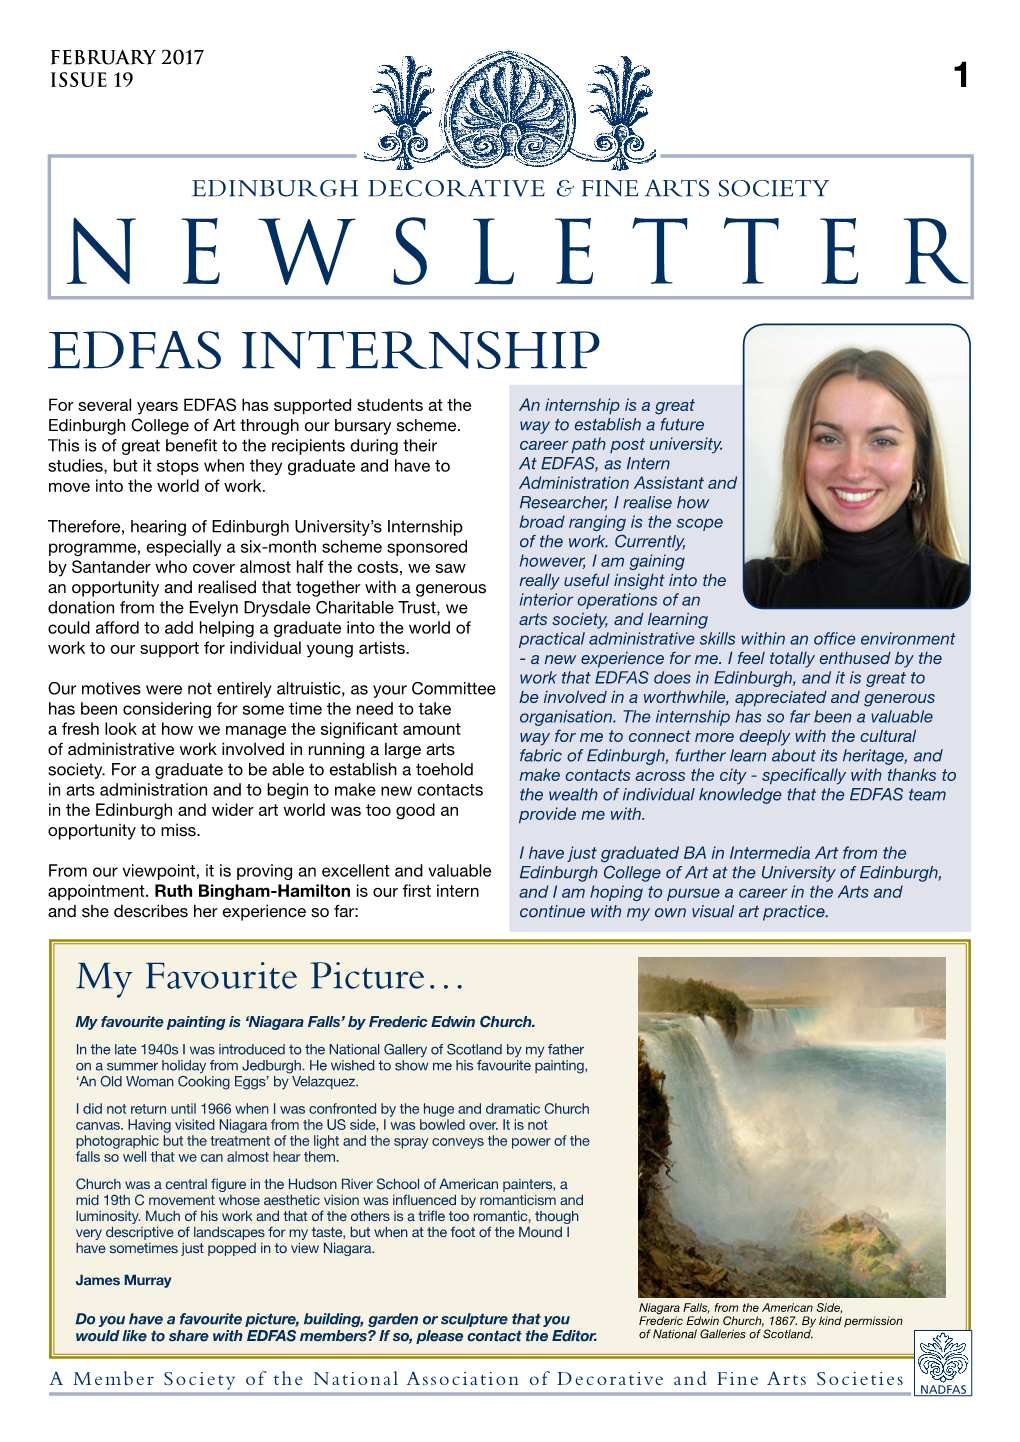 NEWSLETTER EDFAS INTERNSHIP for Several Years EDFAS Has Supported Students at the an Internship Is a Great Edinburgh College of Art Through Our Bursary Scheme